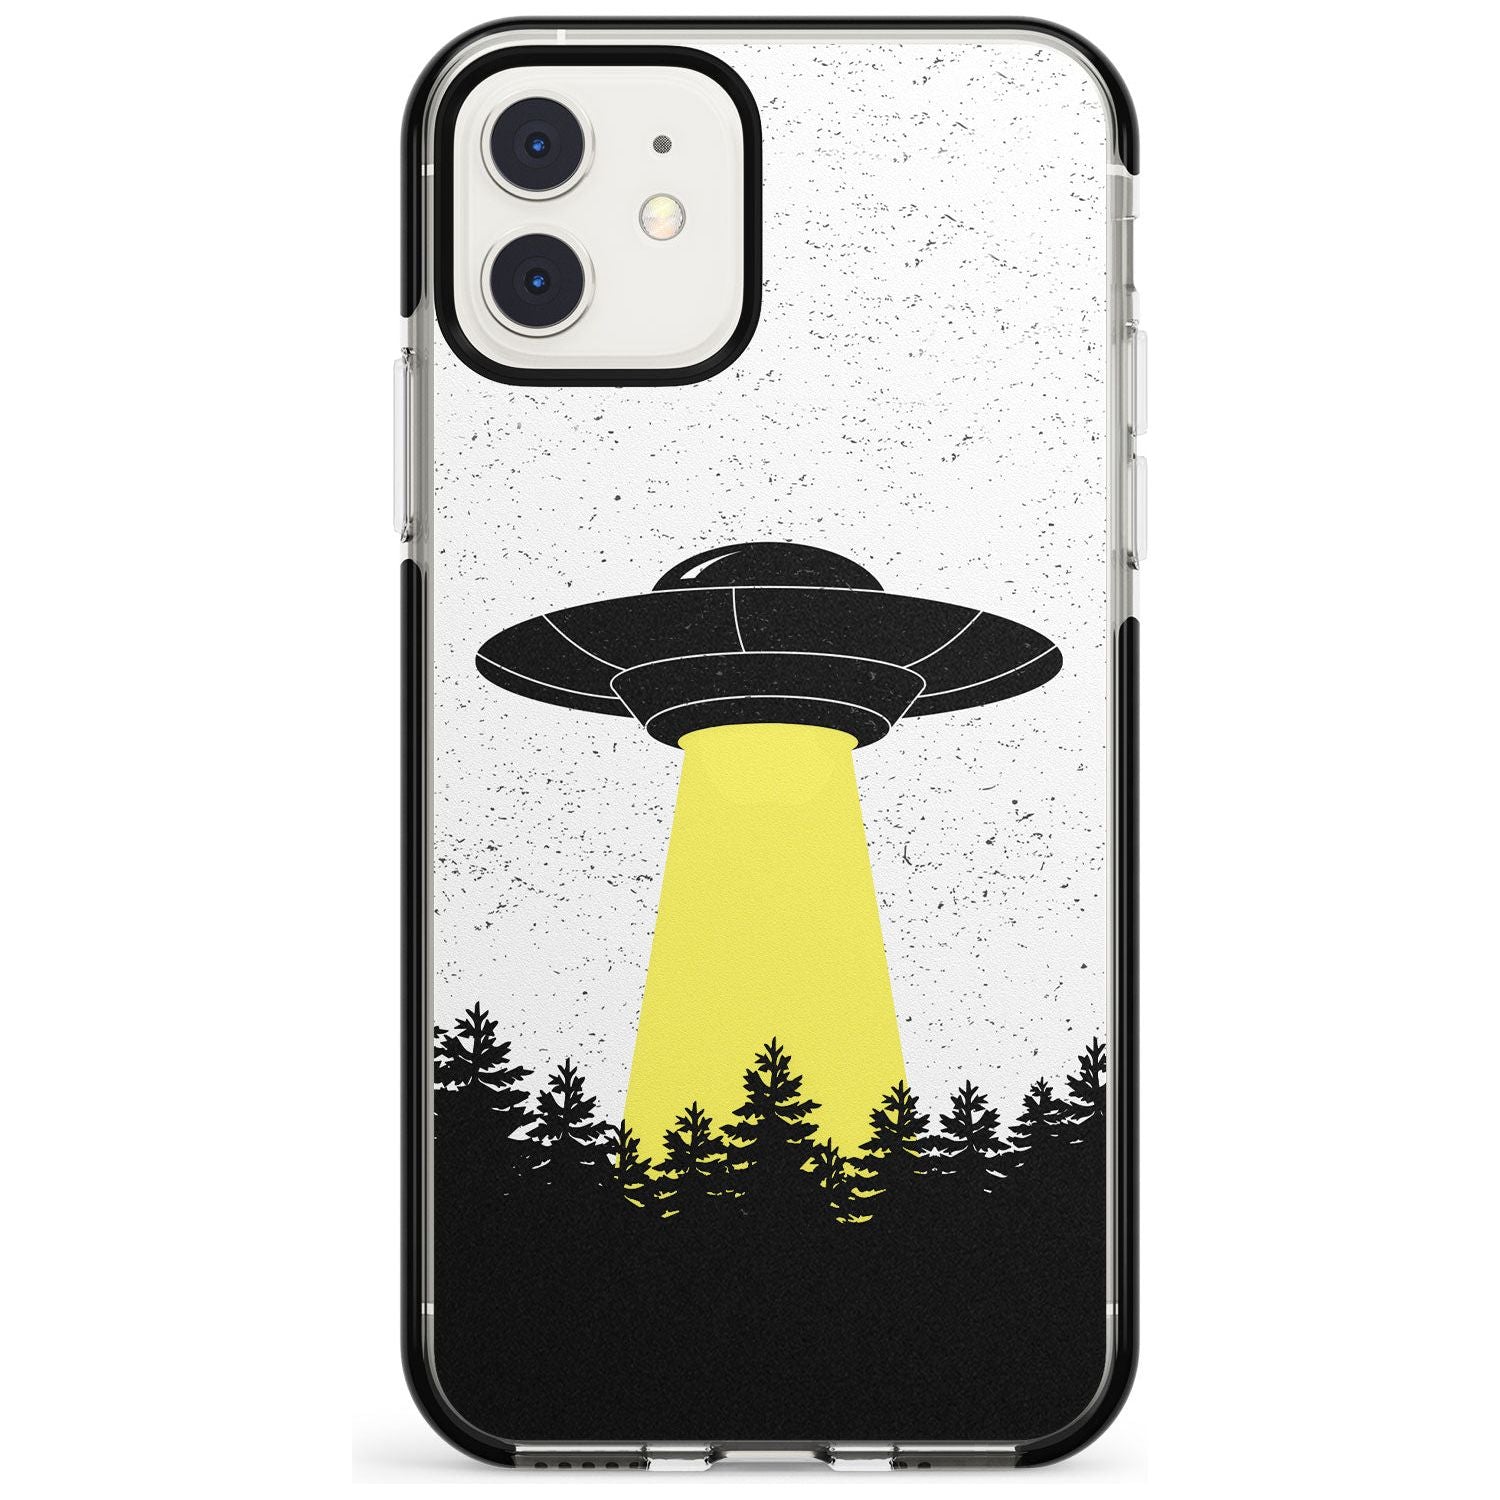 Forest Abduction Black Impact Phone Case for iPhone 11 Pro Max